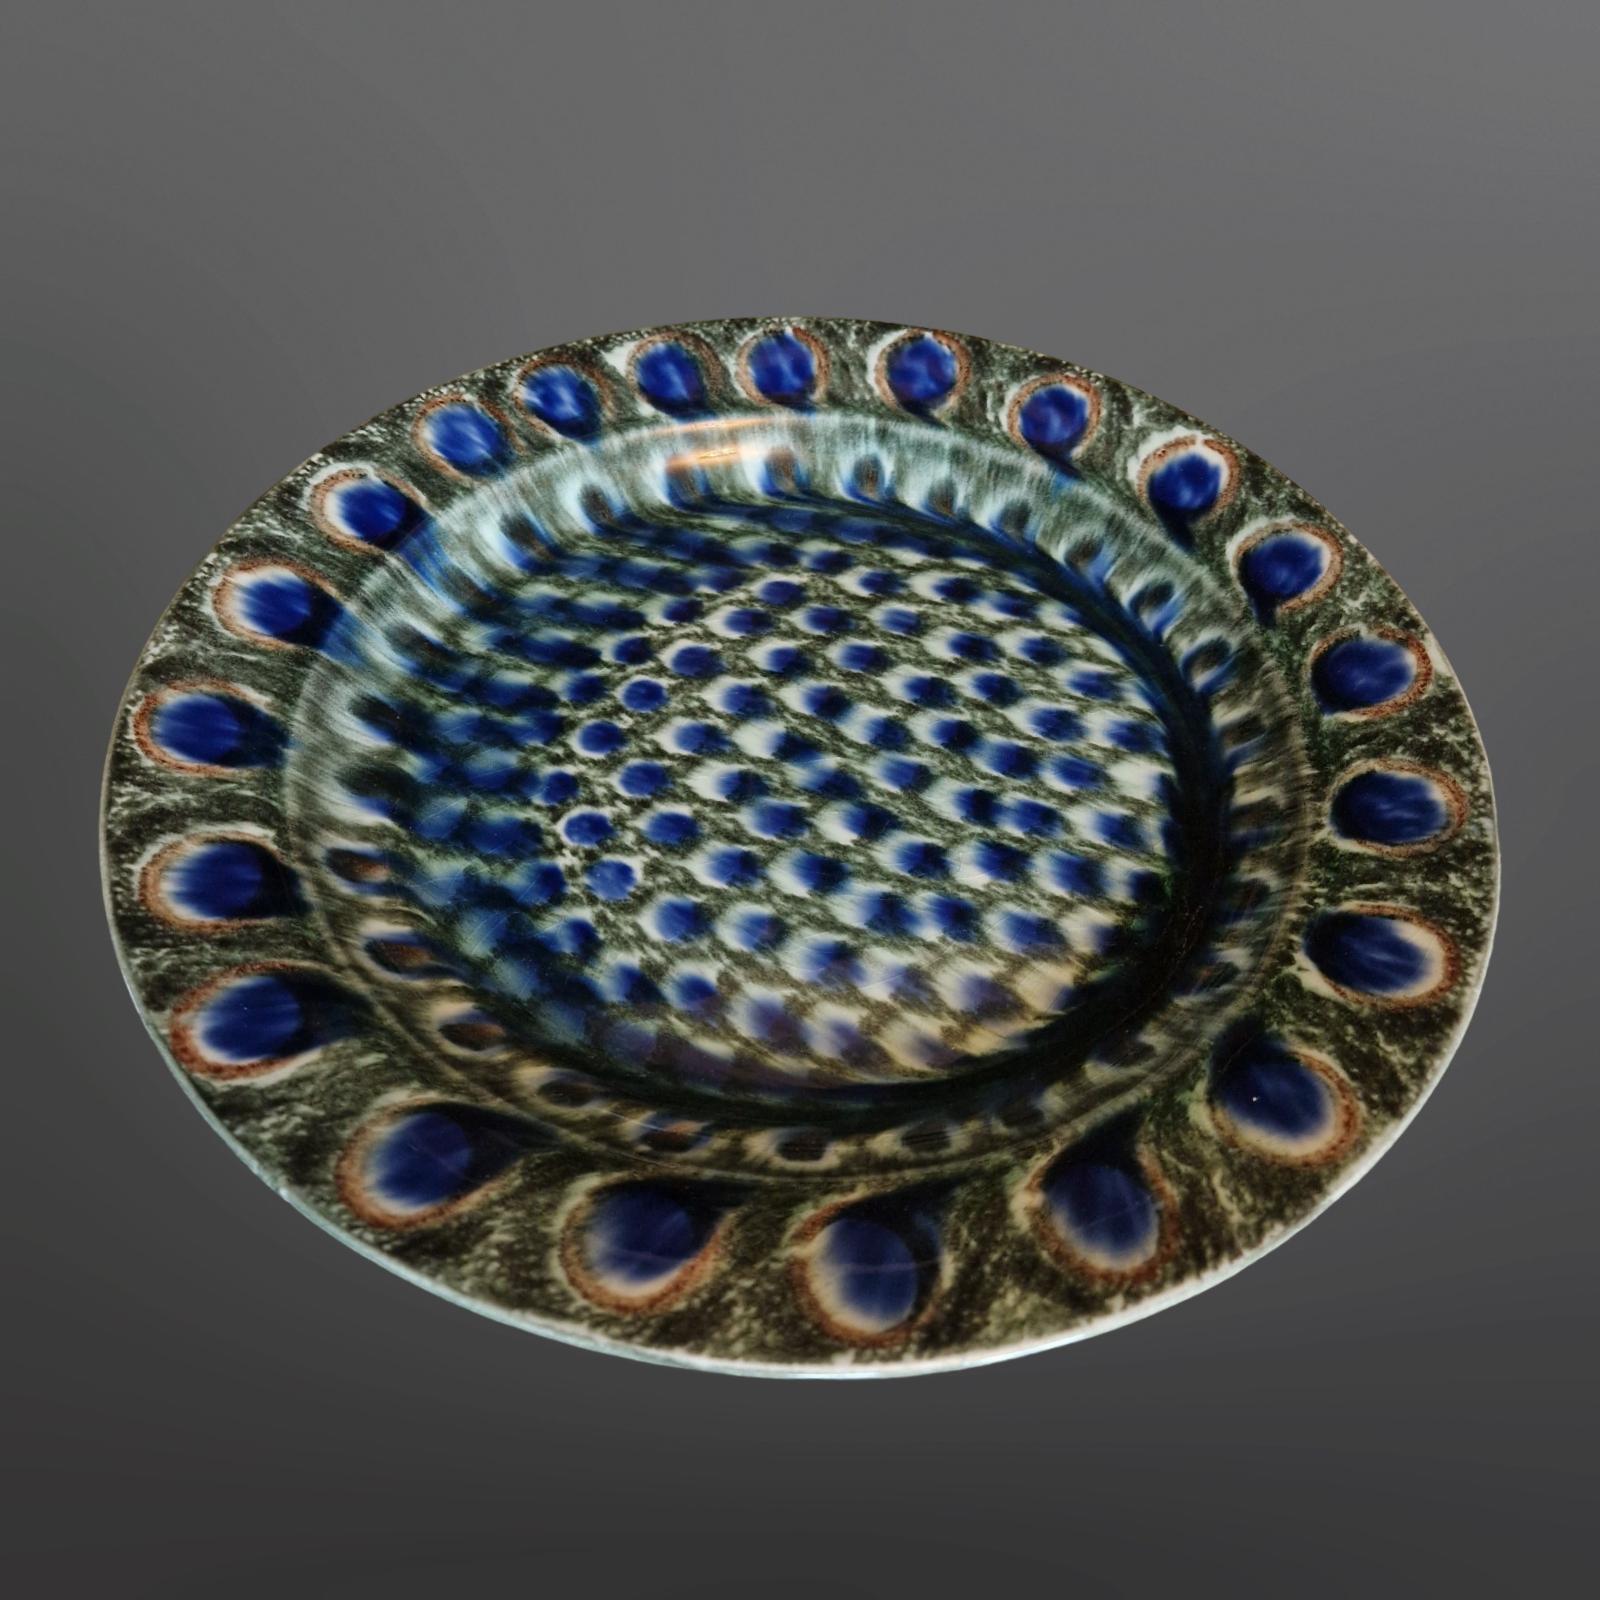 Art Nouveau Antique plate with peacock pattern by Friedrich Festersen, Germany 1900s For Sale